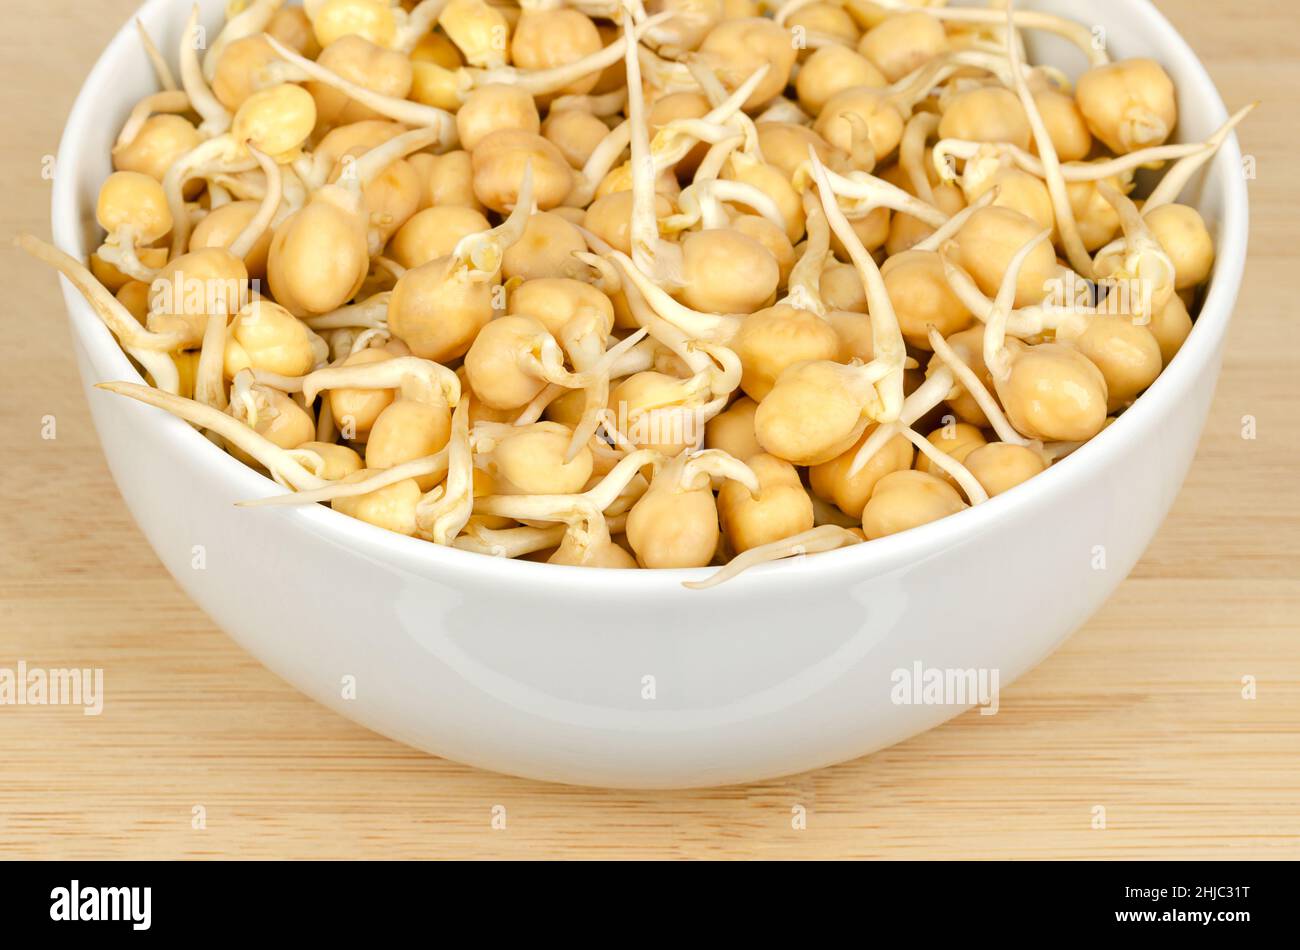 Chickpea sprouts in a white bowl on wooden surface. Raw, fresh, ready to eat, sprouted chickpeas, seeds of Cicer arietinum, legume and protein source. Stock Photo